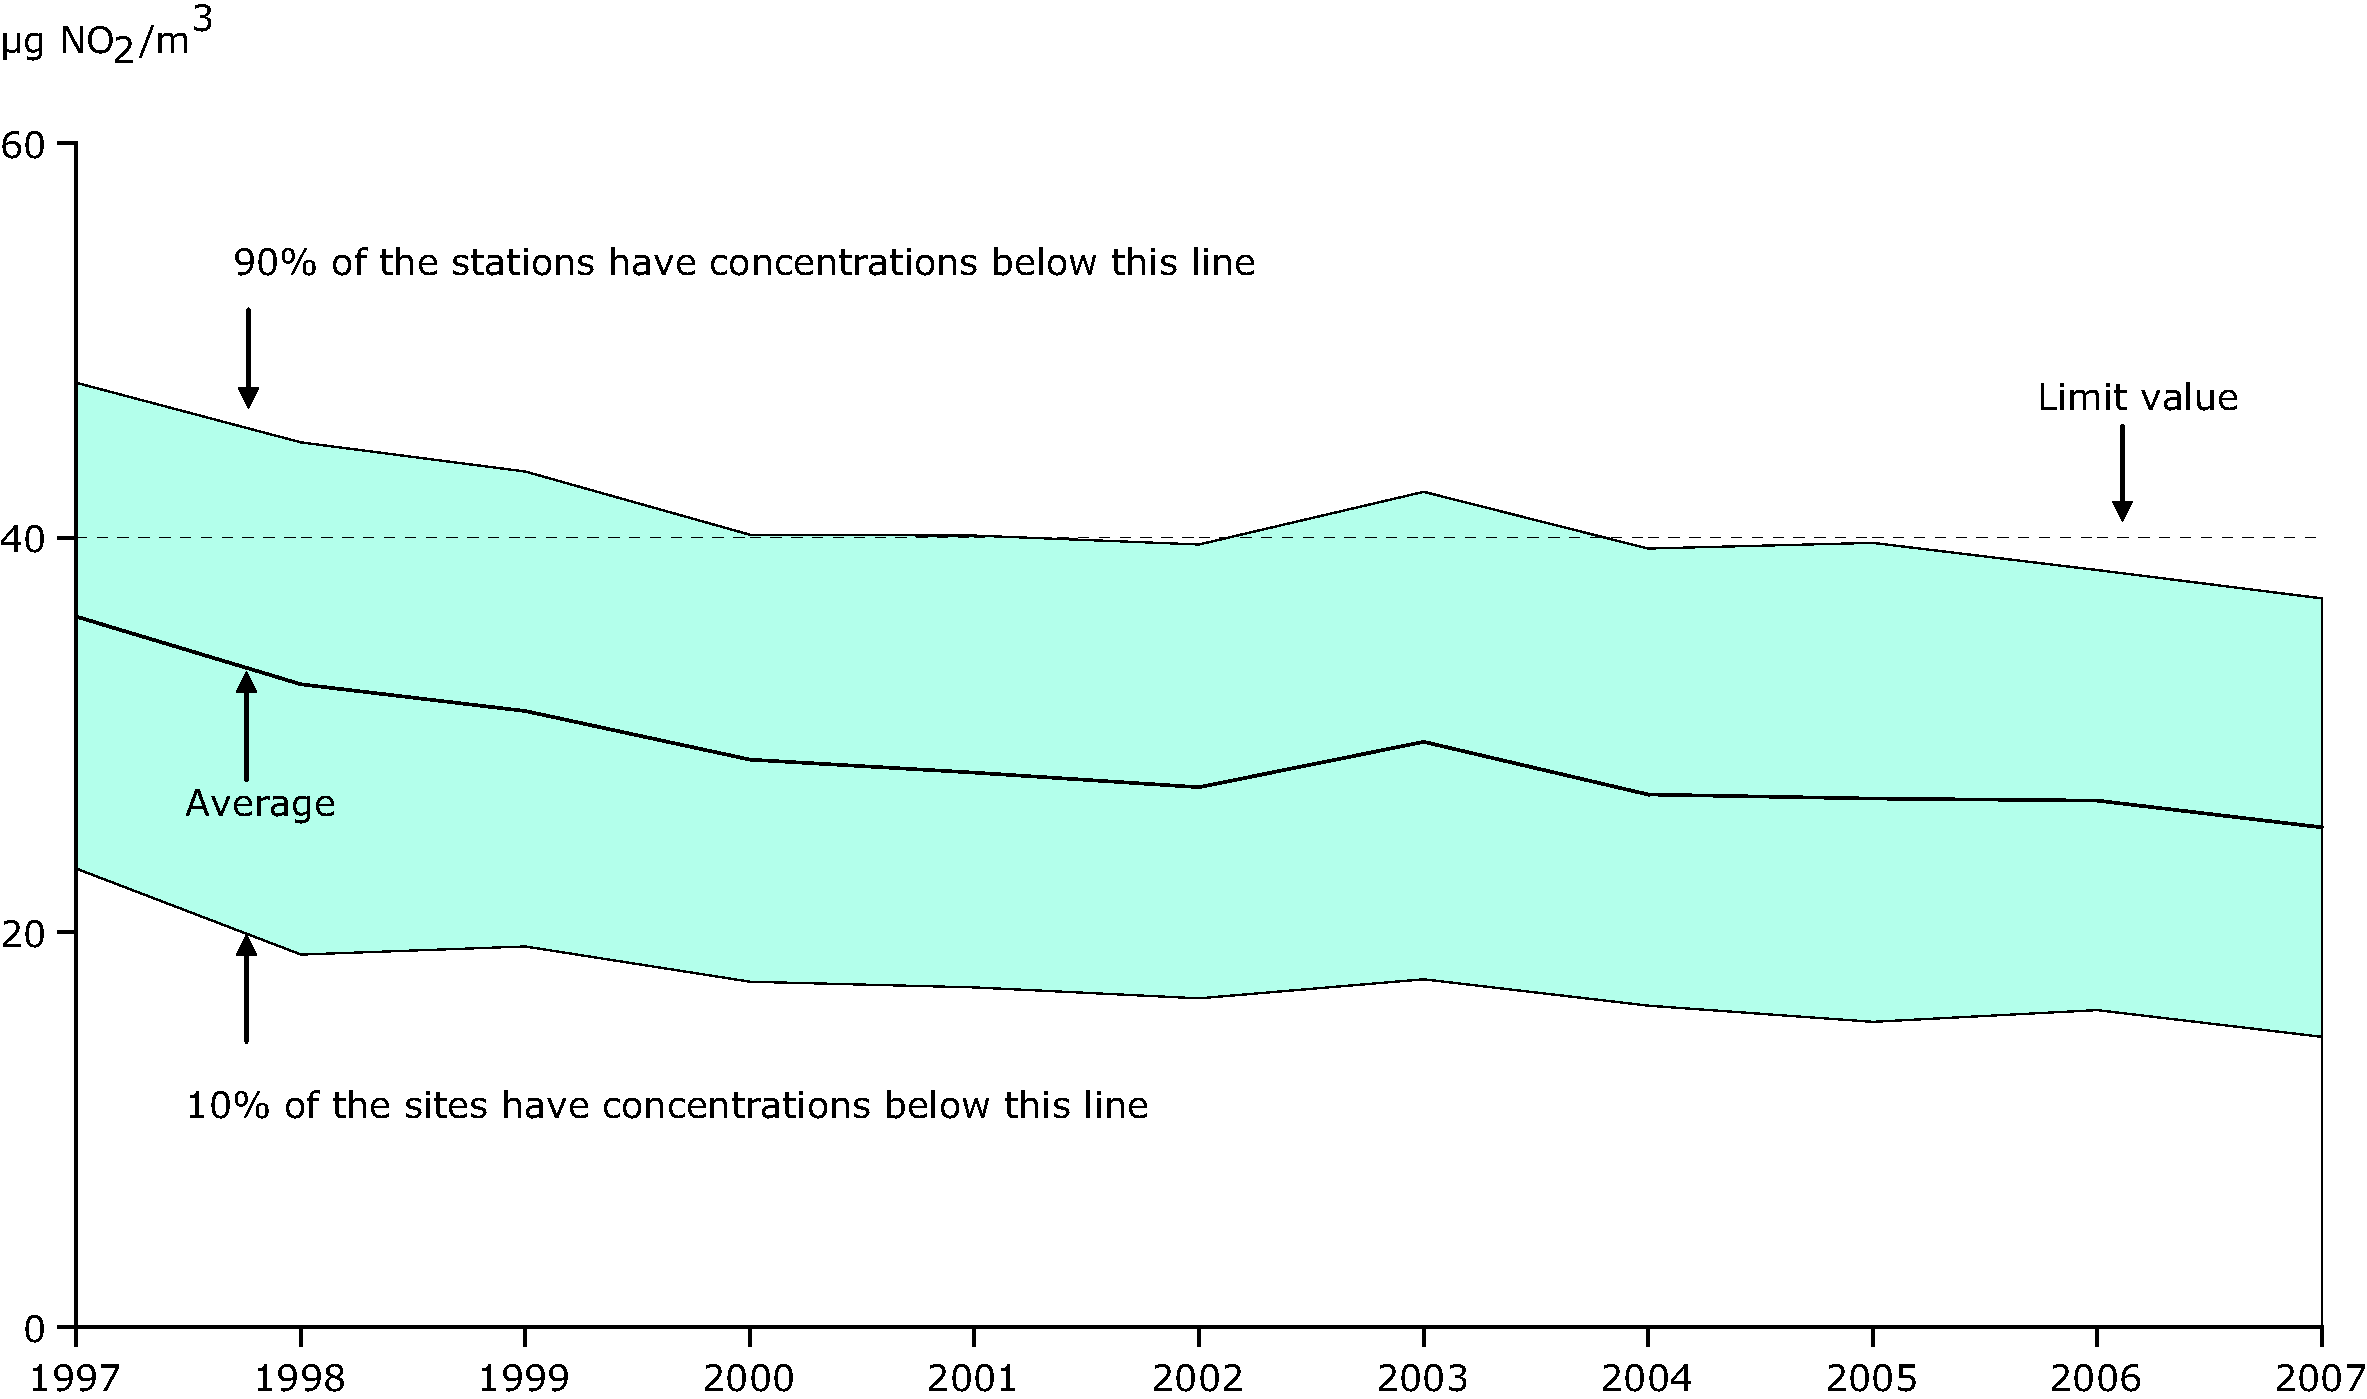 Annual mean NO2 concentration observed at urban background stations, EEA member countries, 1997-2007